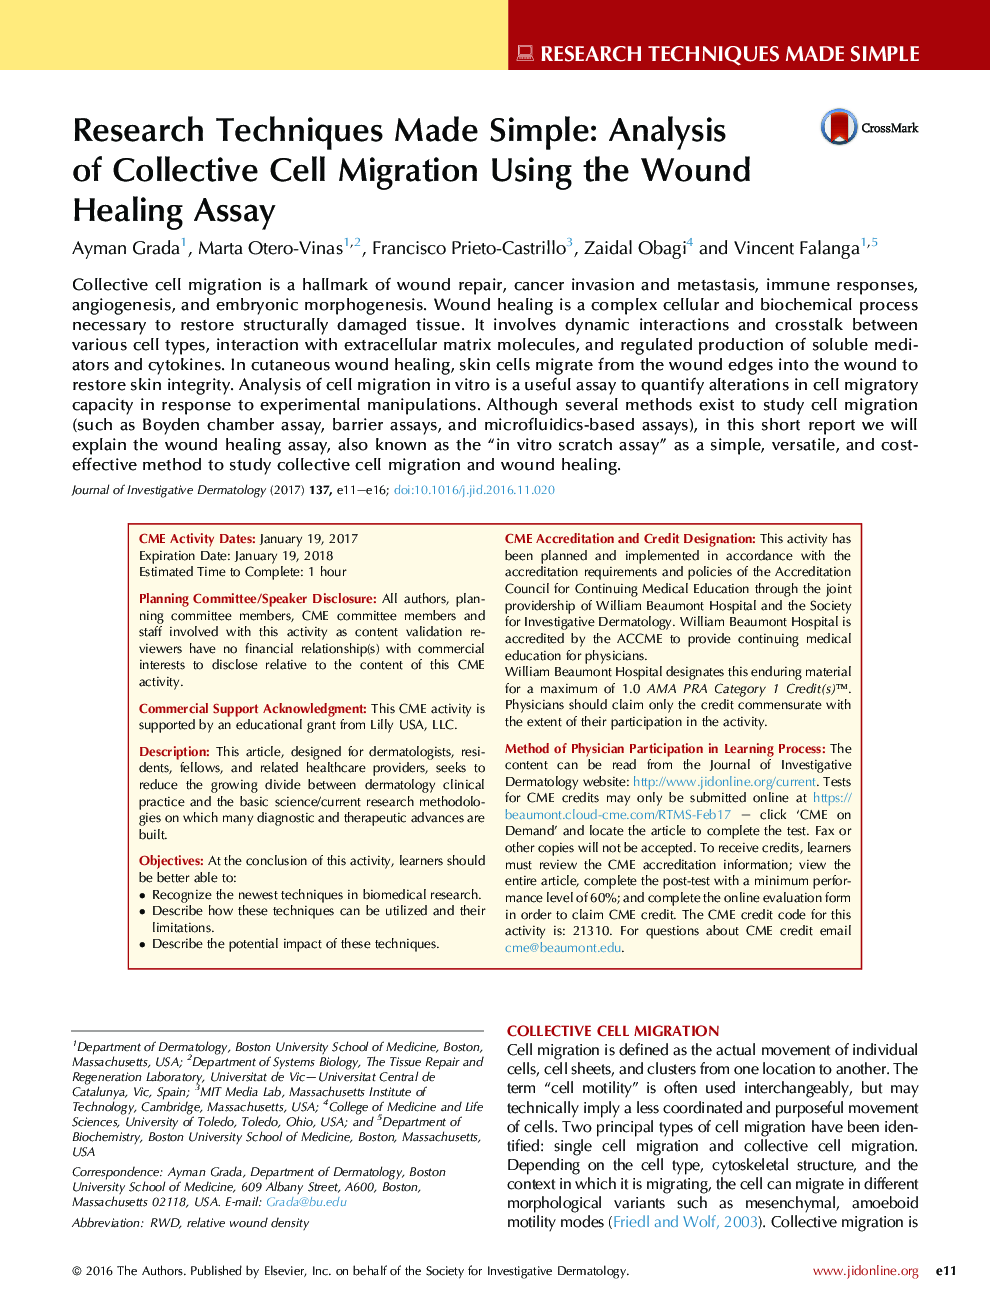 Research Techniques Made Simple: Analysis of Collective Cell Migration Using the Wound Healing Assay